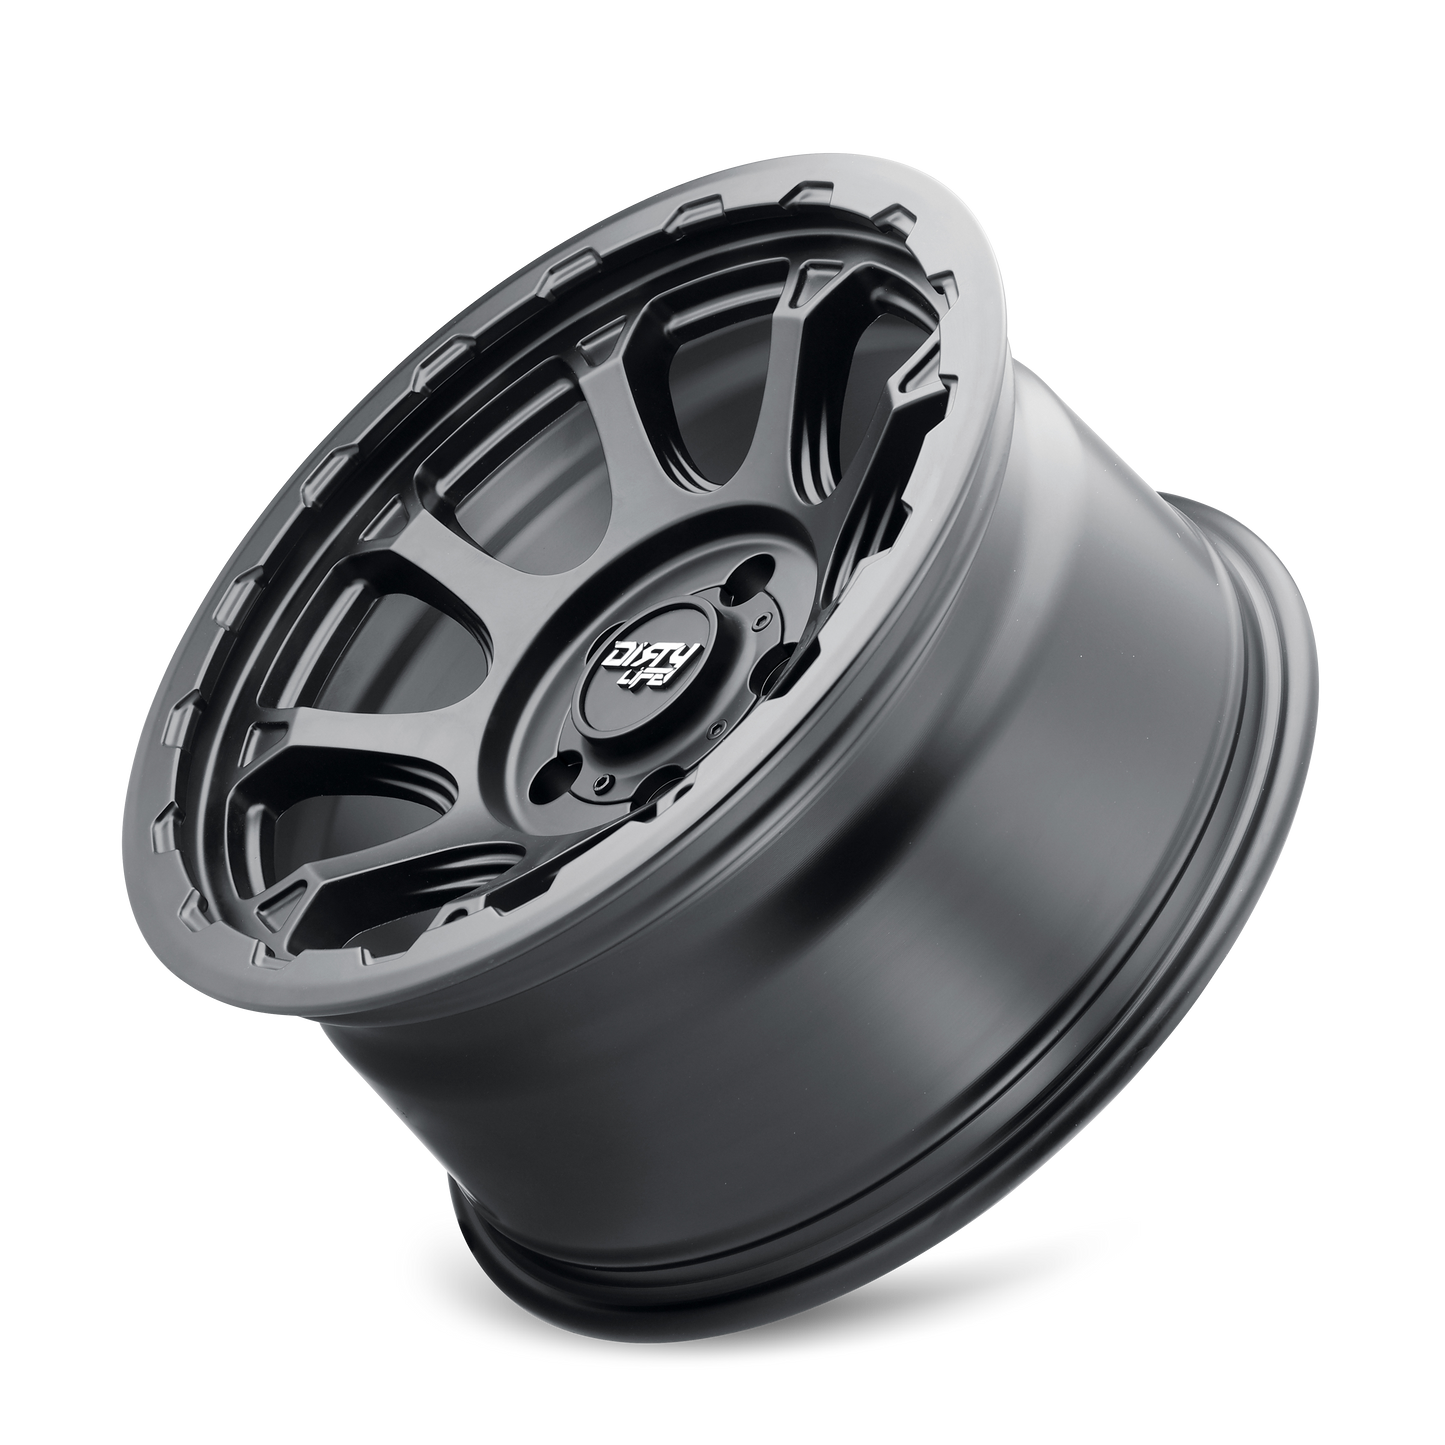 DIRTY LIFE DRIFTER Wheels Matte Black W/Simulated Ring